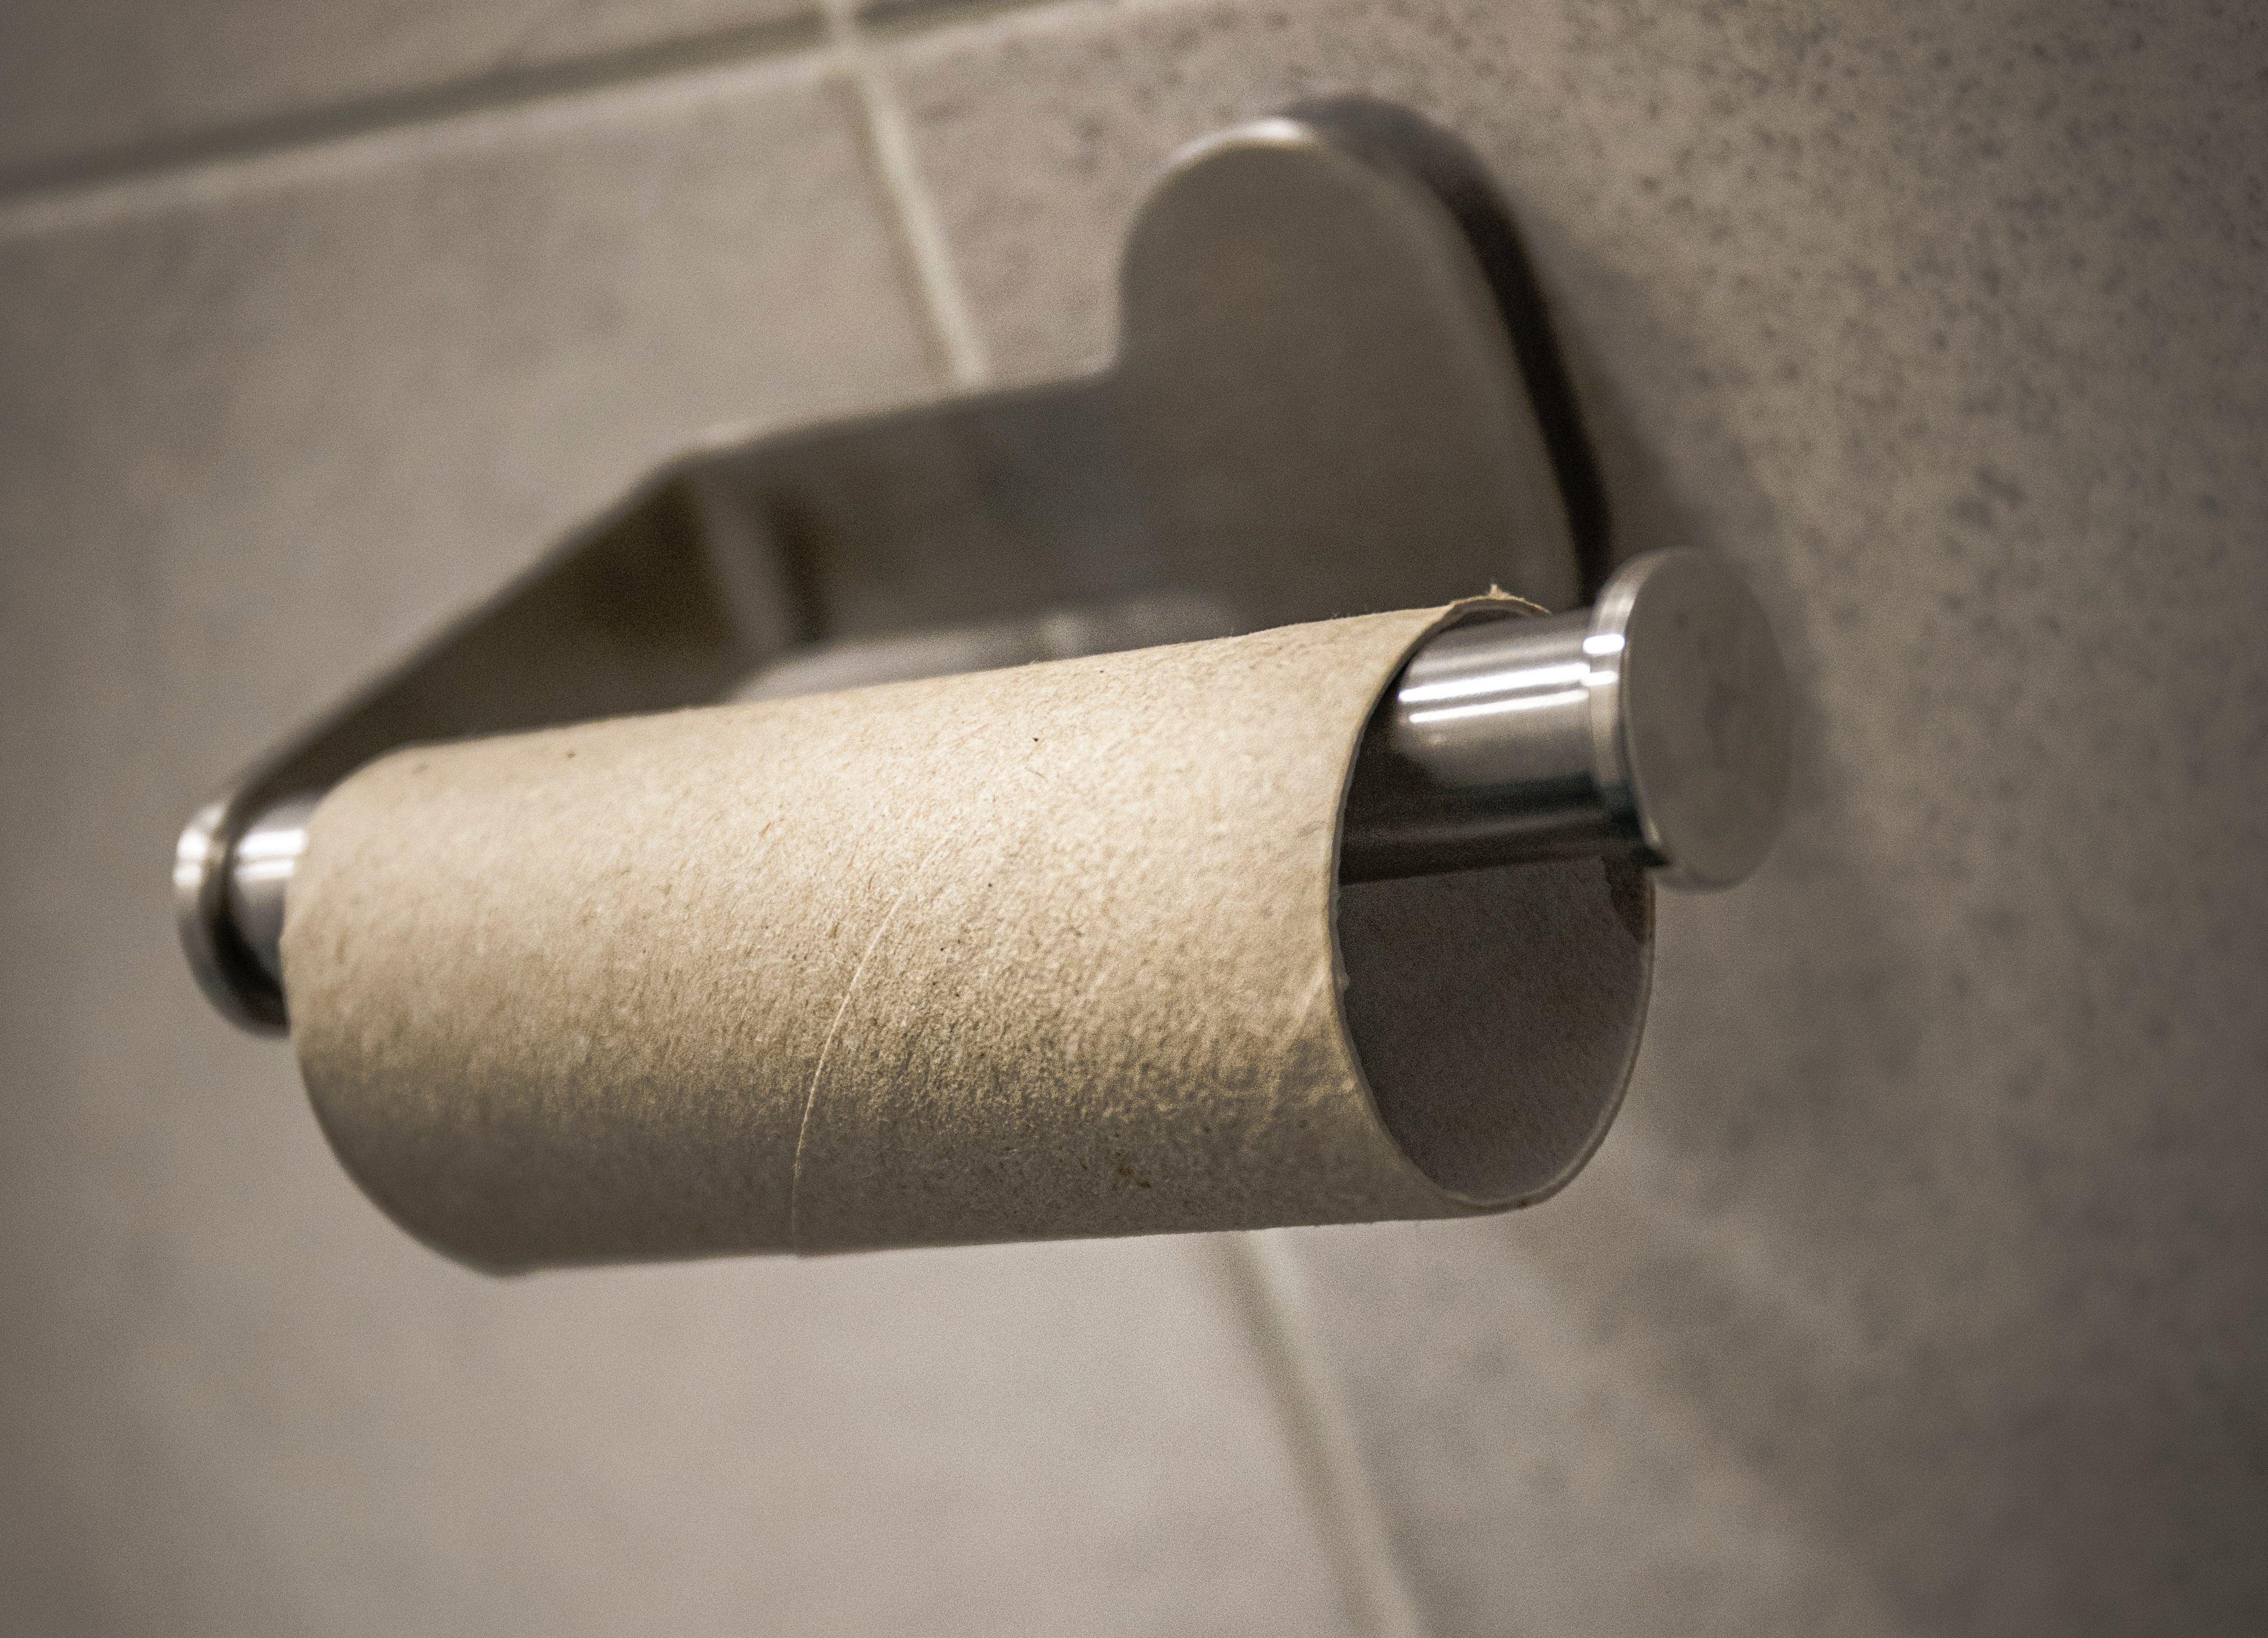 Can Flushing Too Much Toilet Paper Actually Cause A Clog?